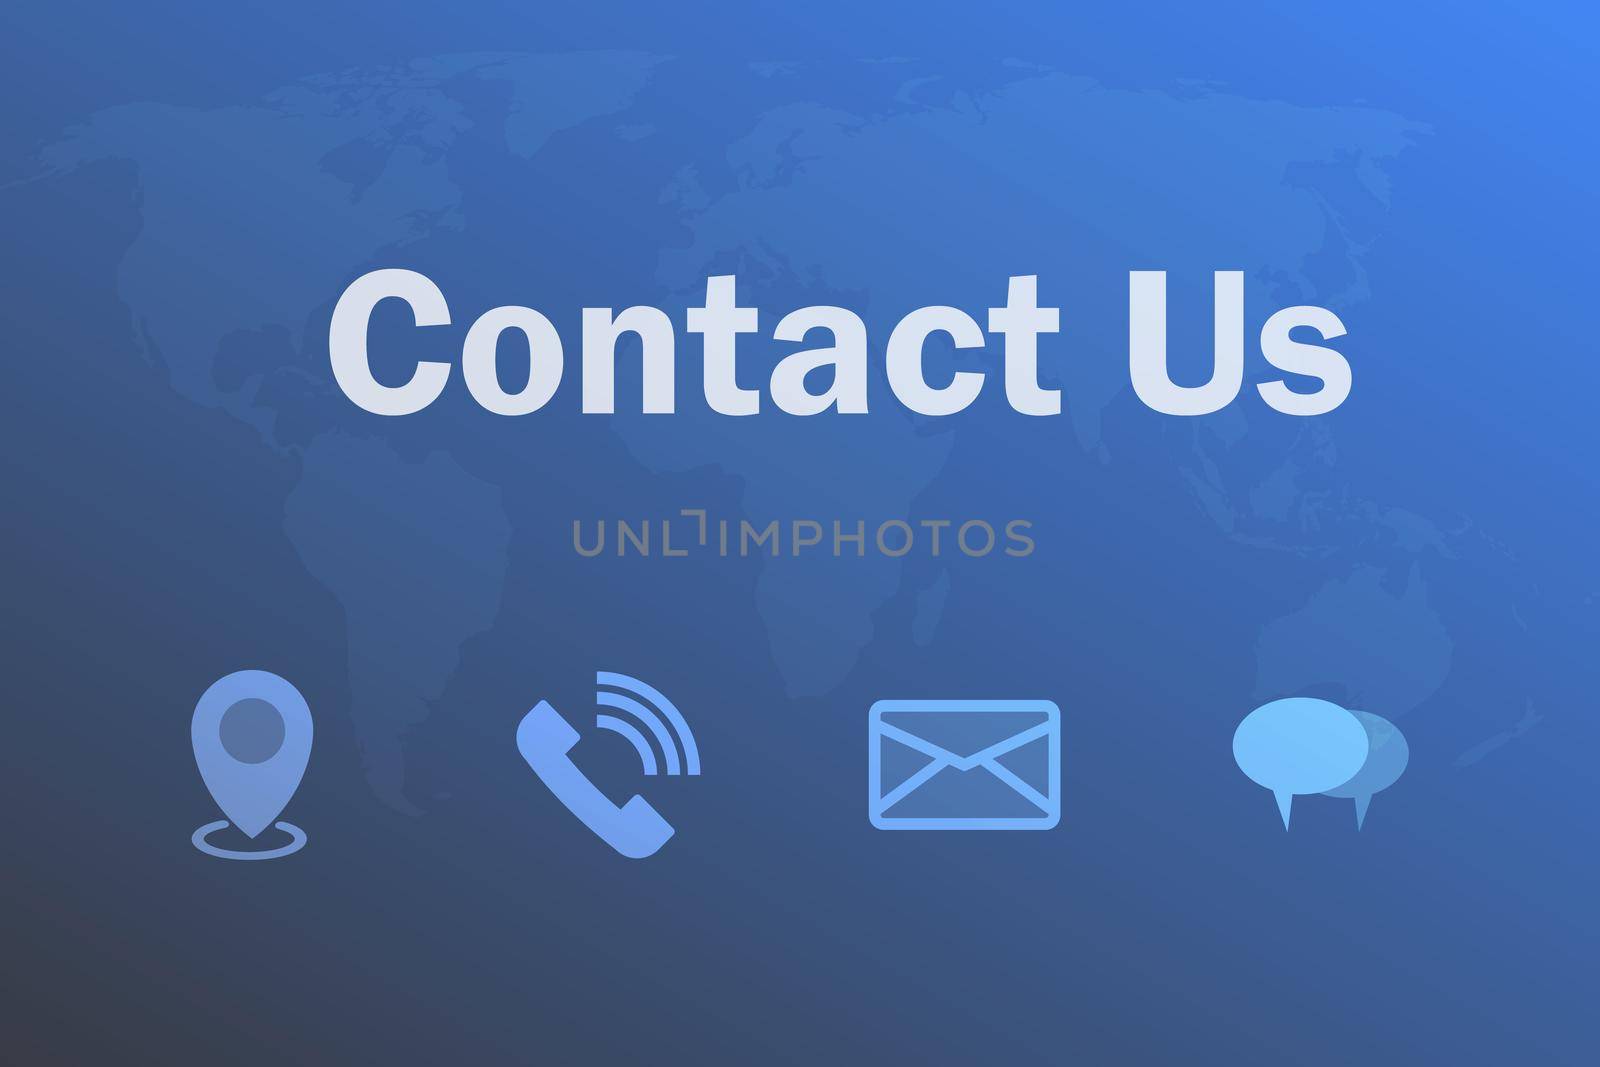 Contact us concept. Contact us page on website. Address, phone, e-mail, and chat icons on blue background. Corporate information contact data for customers. Customer service and support. Web banner.